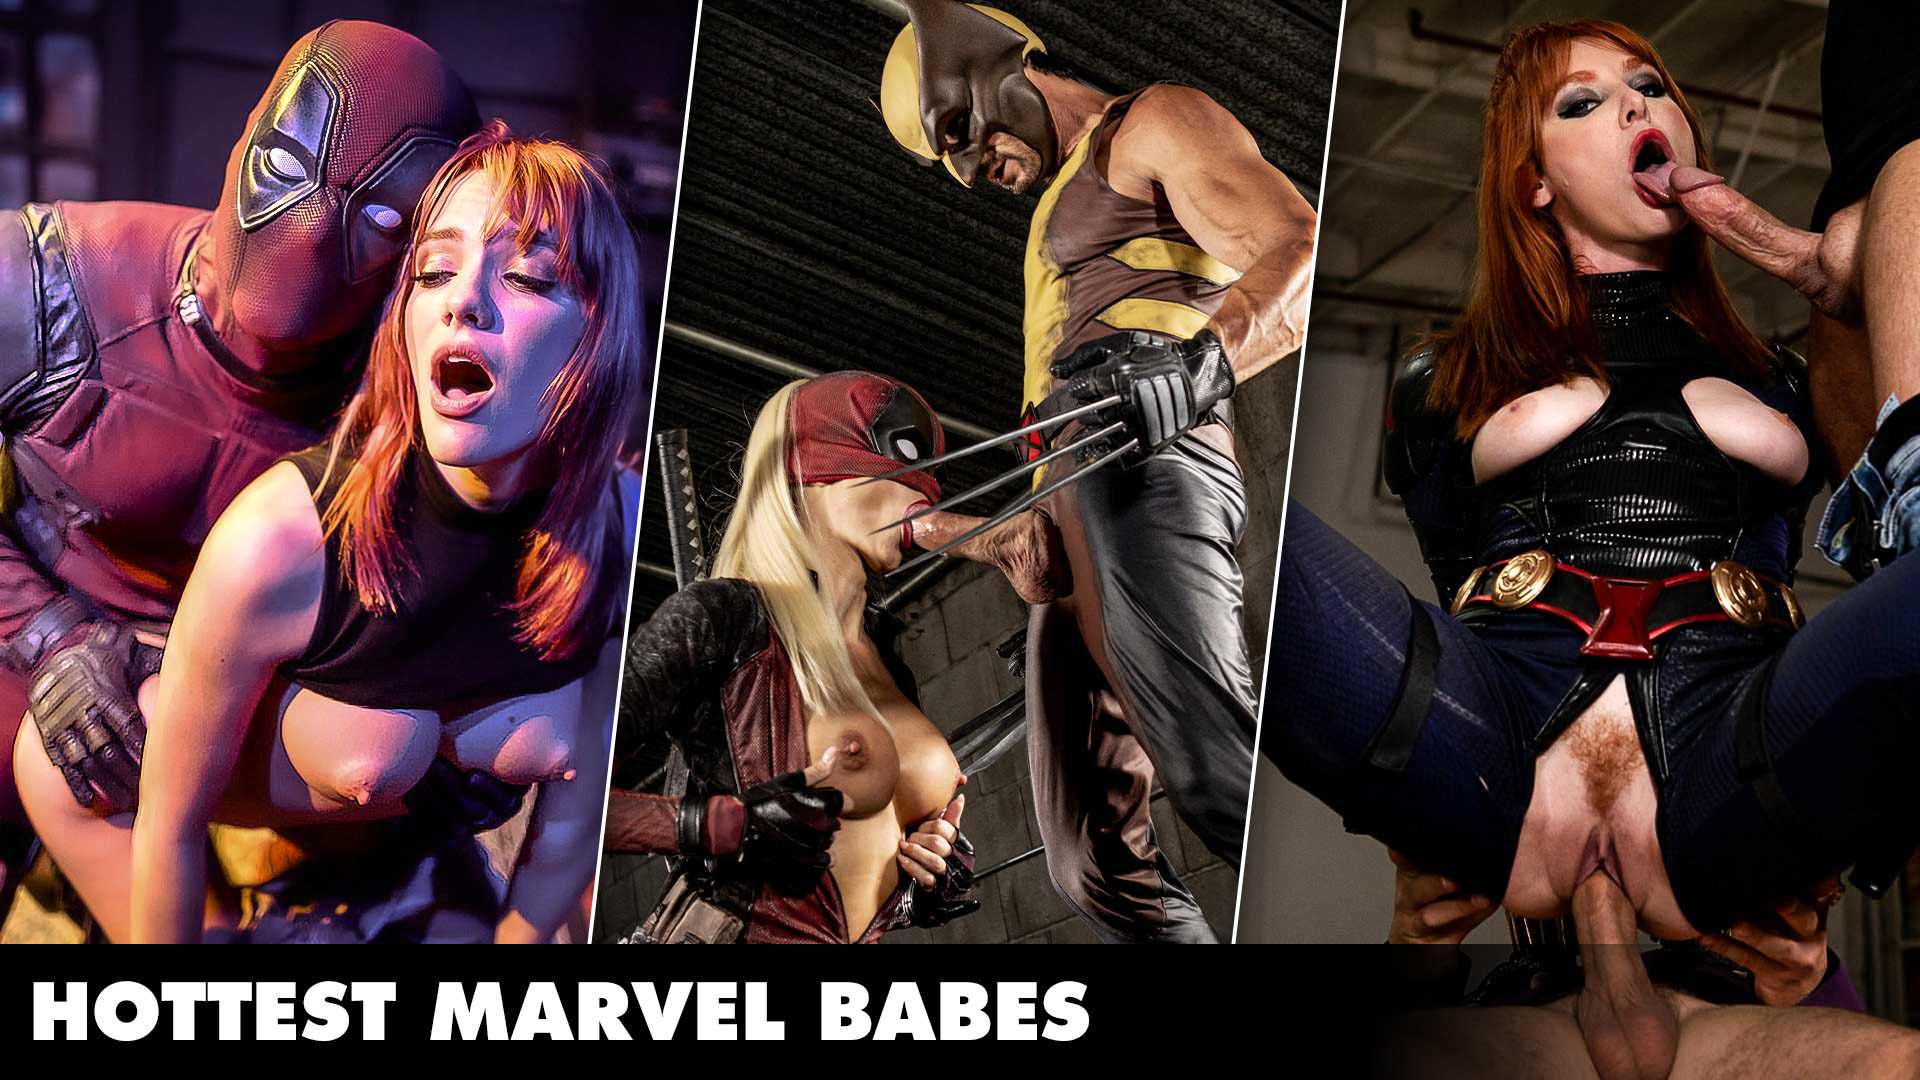 Wicked Kenzie Taylor, Lacy Lennon, Jessica Drake, Kenna James Hottest Marvel Babes